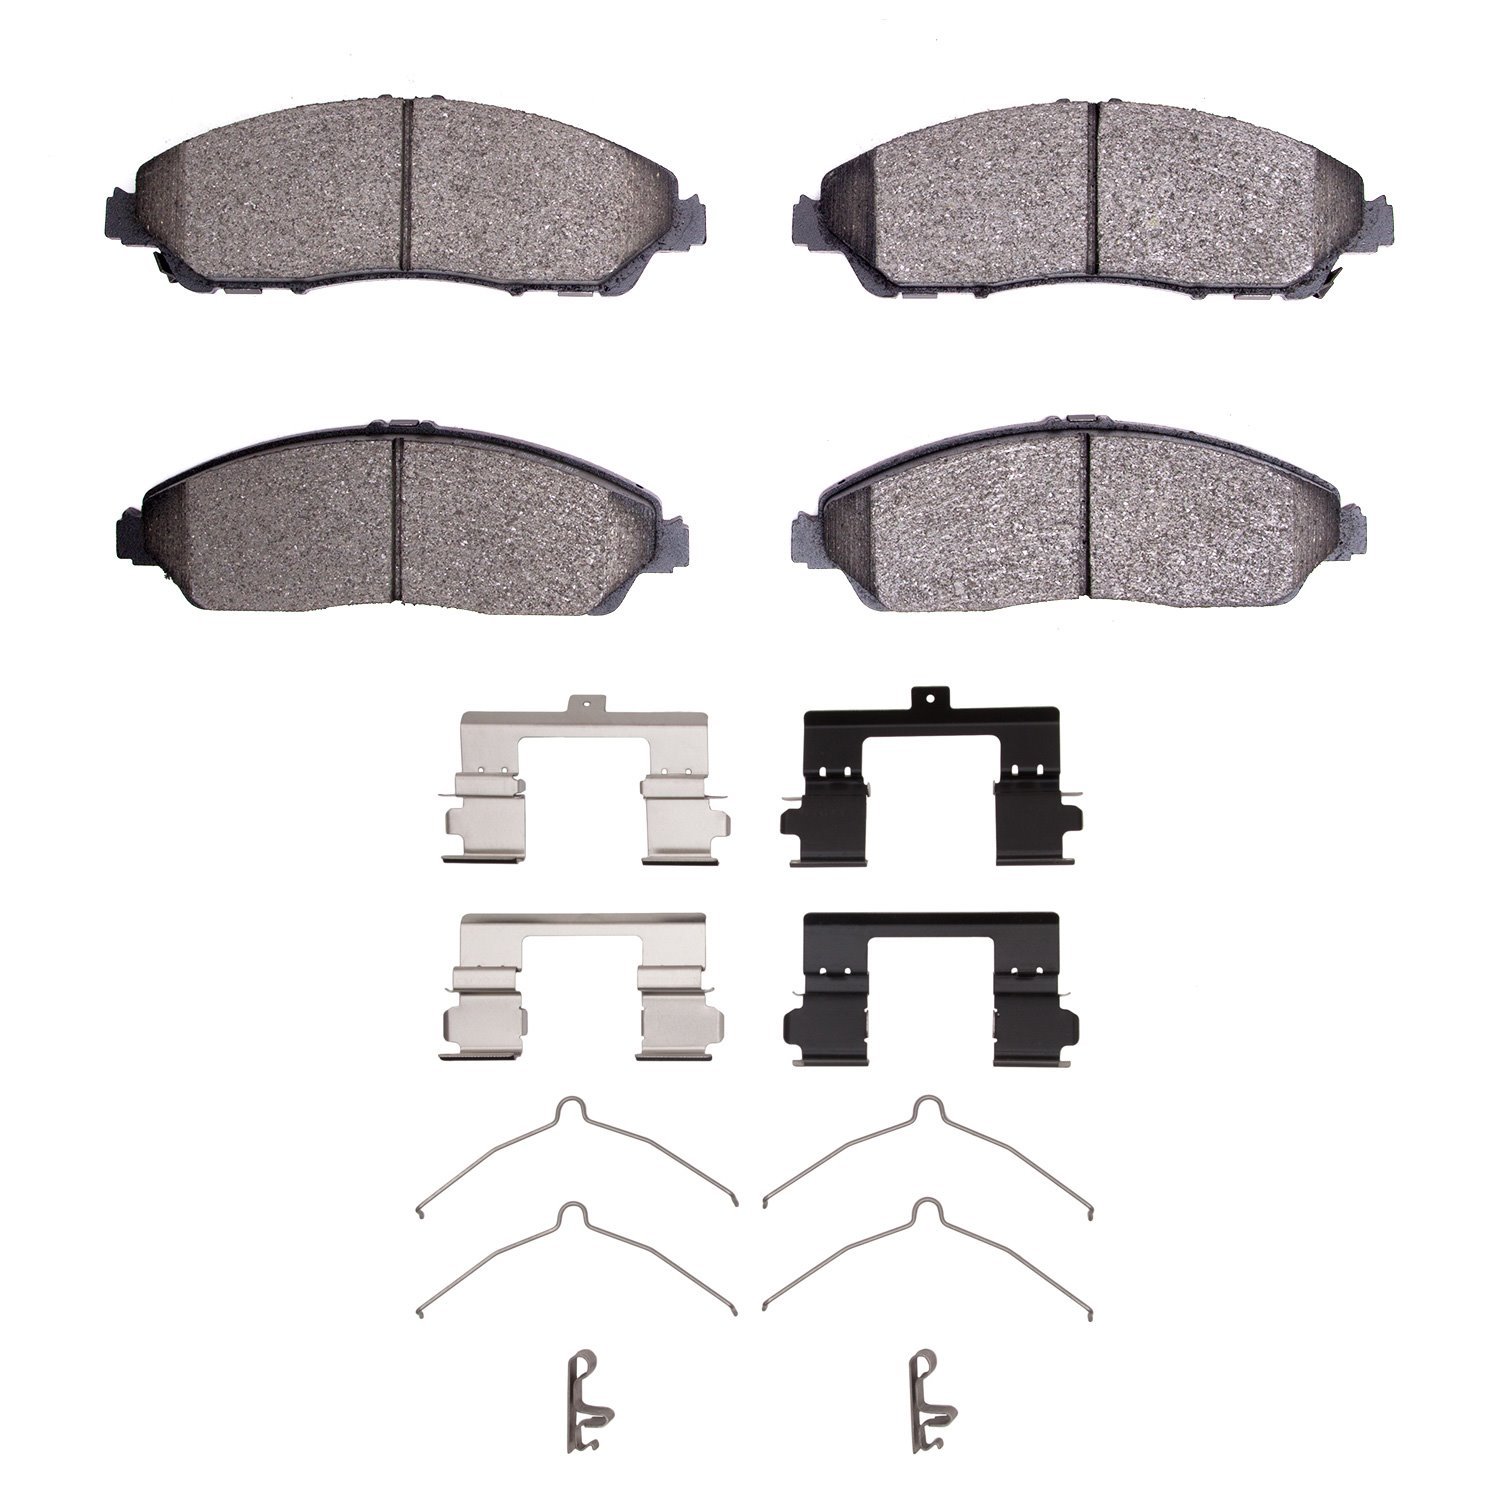 1115-1723-01 Active Performance Brake Pads & Hardware Kit, Fits Select Acura/Honda, Position: Front